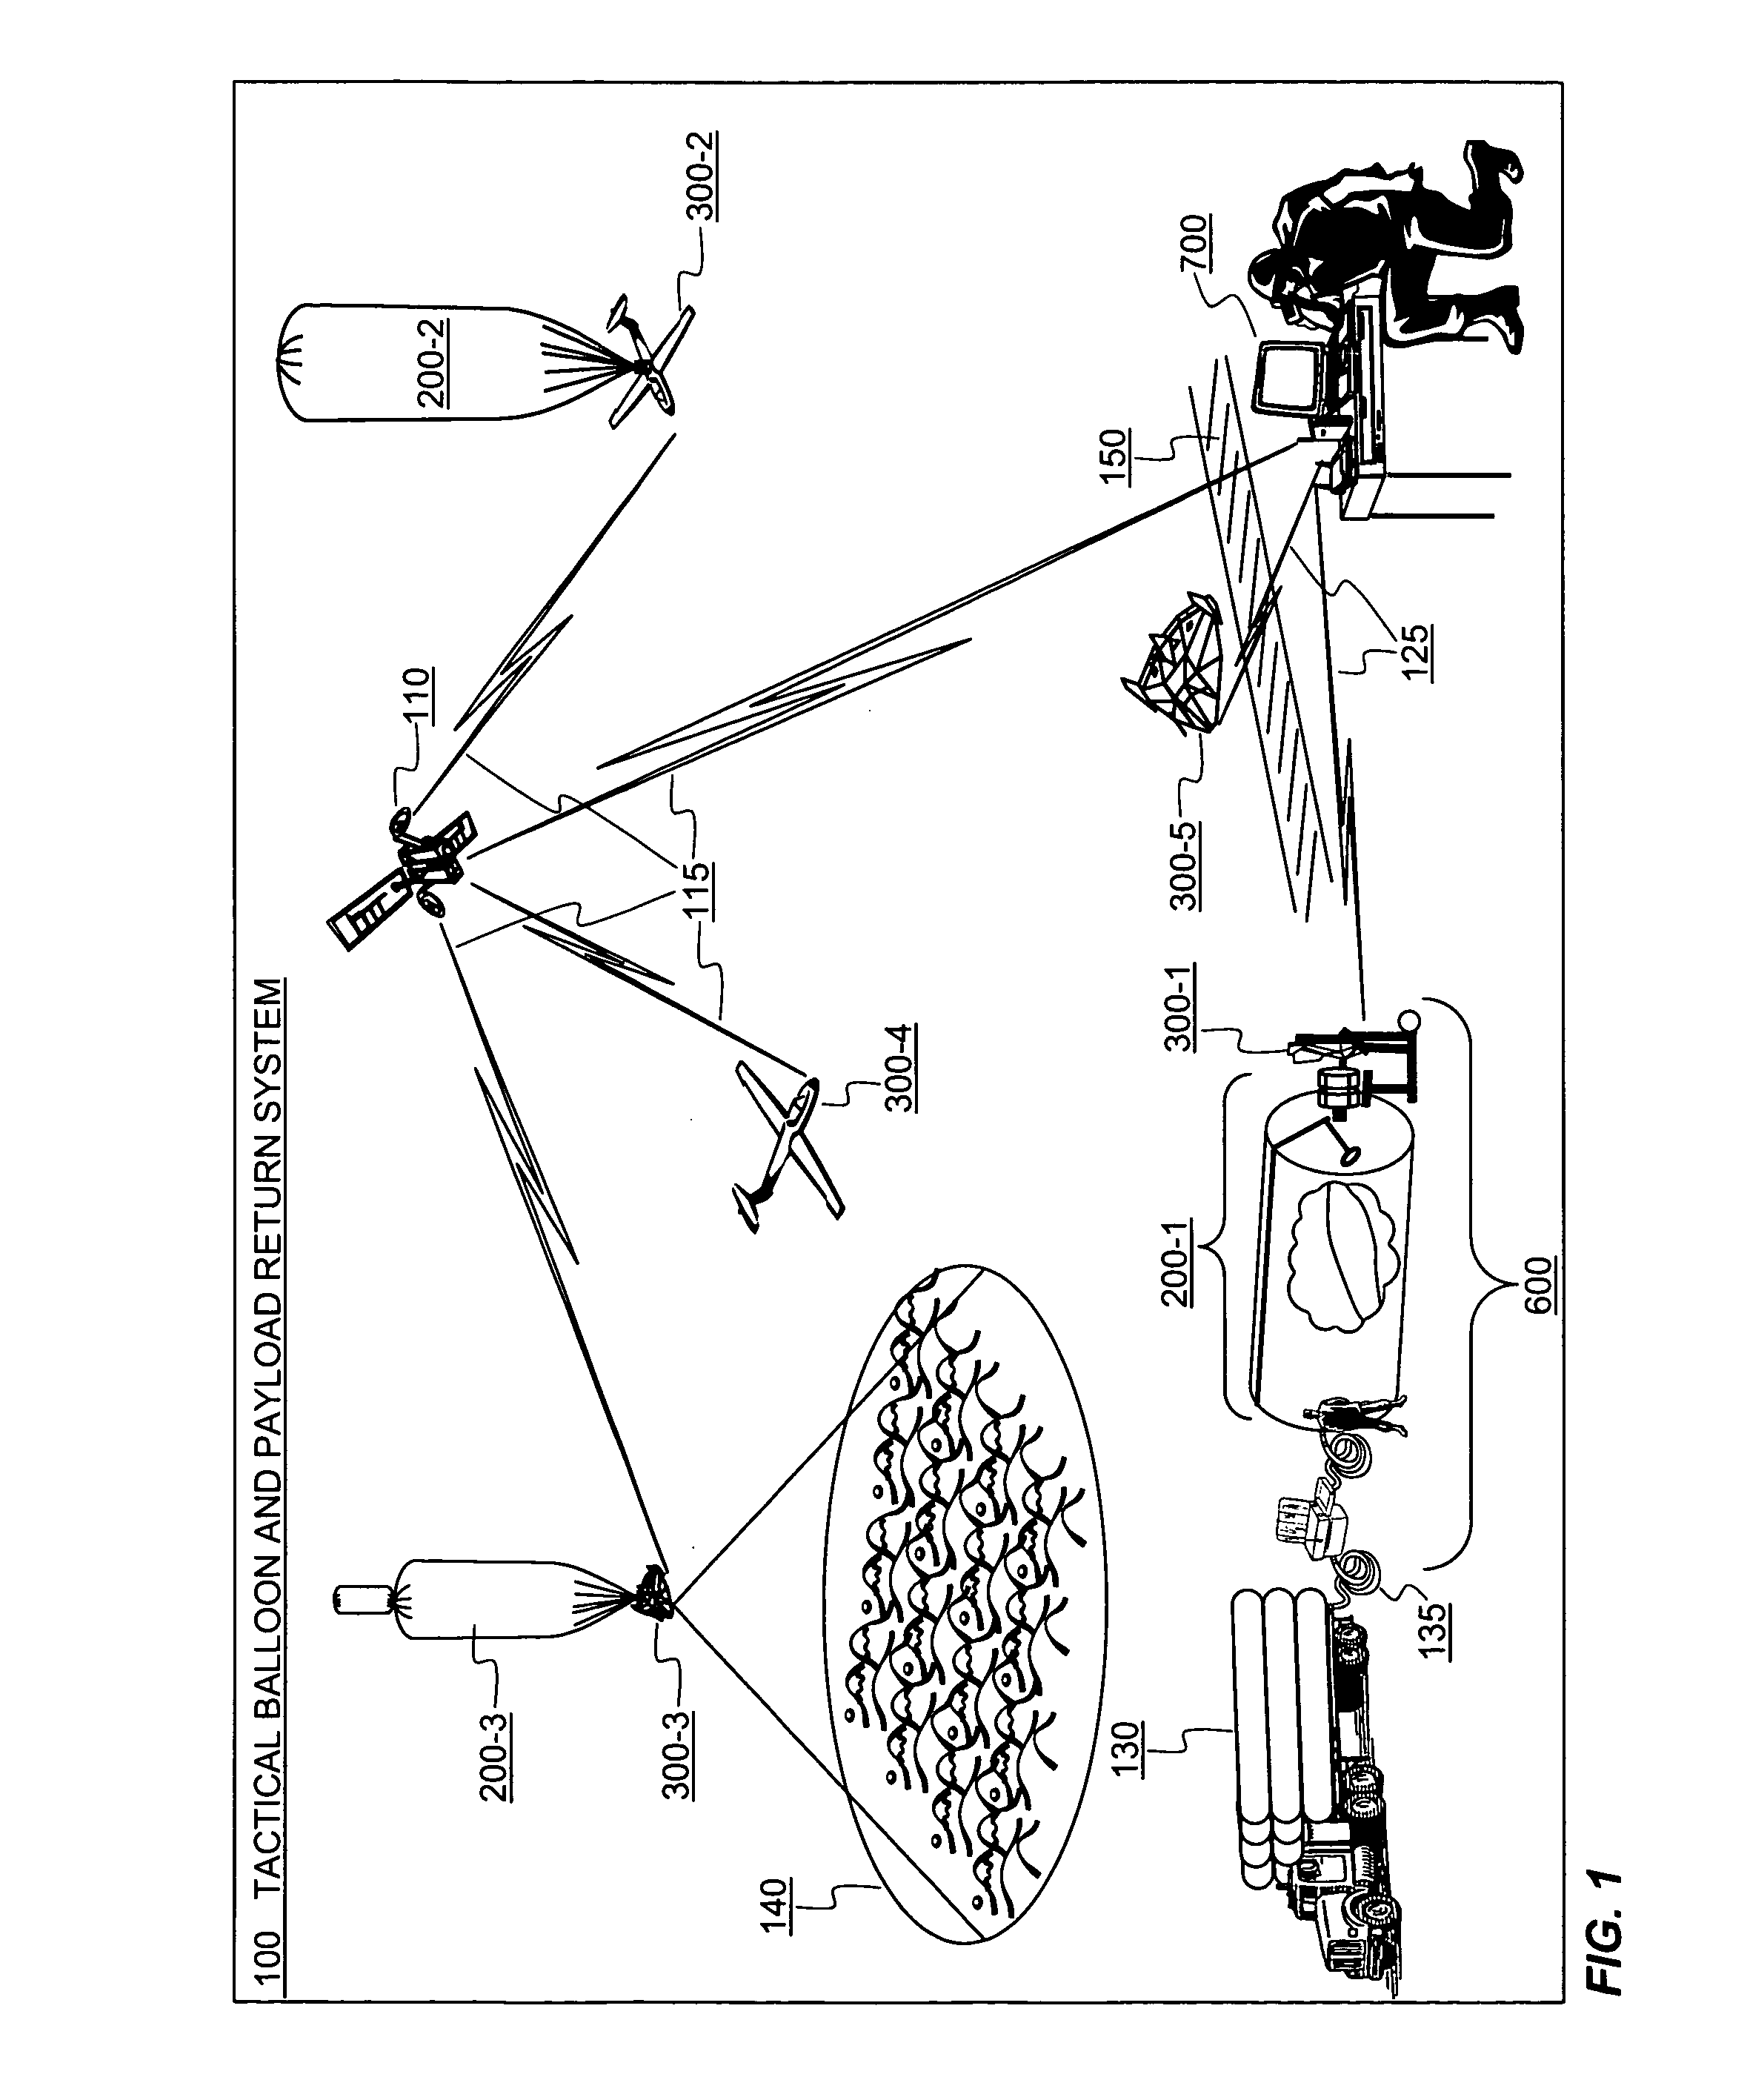 System for tactical balloon launch and payload return